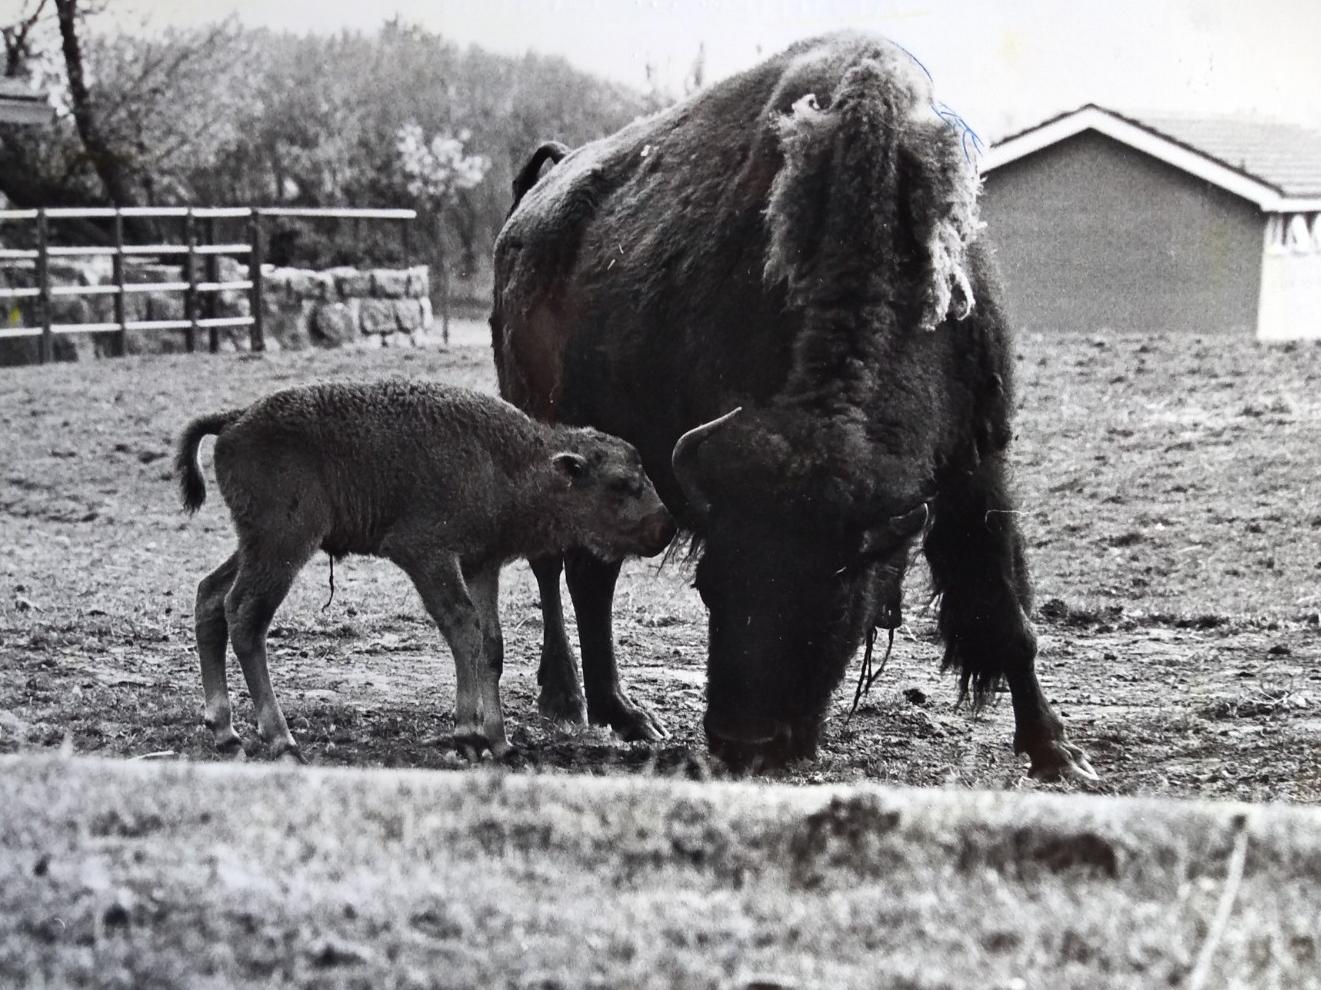 Dumpty the baby bison with its mother